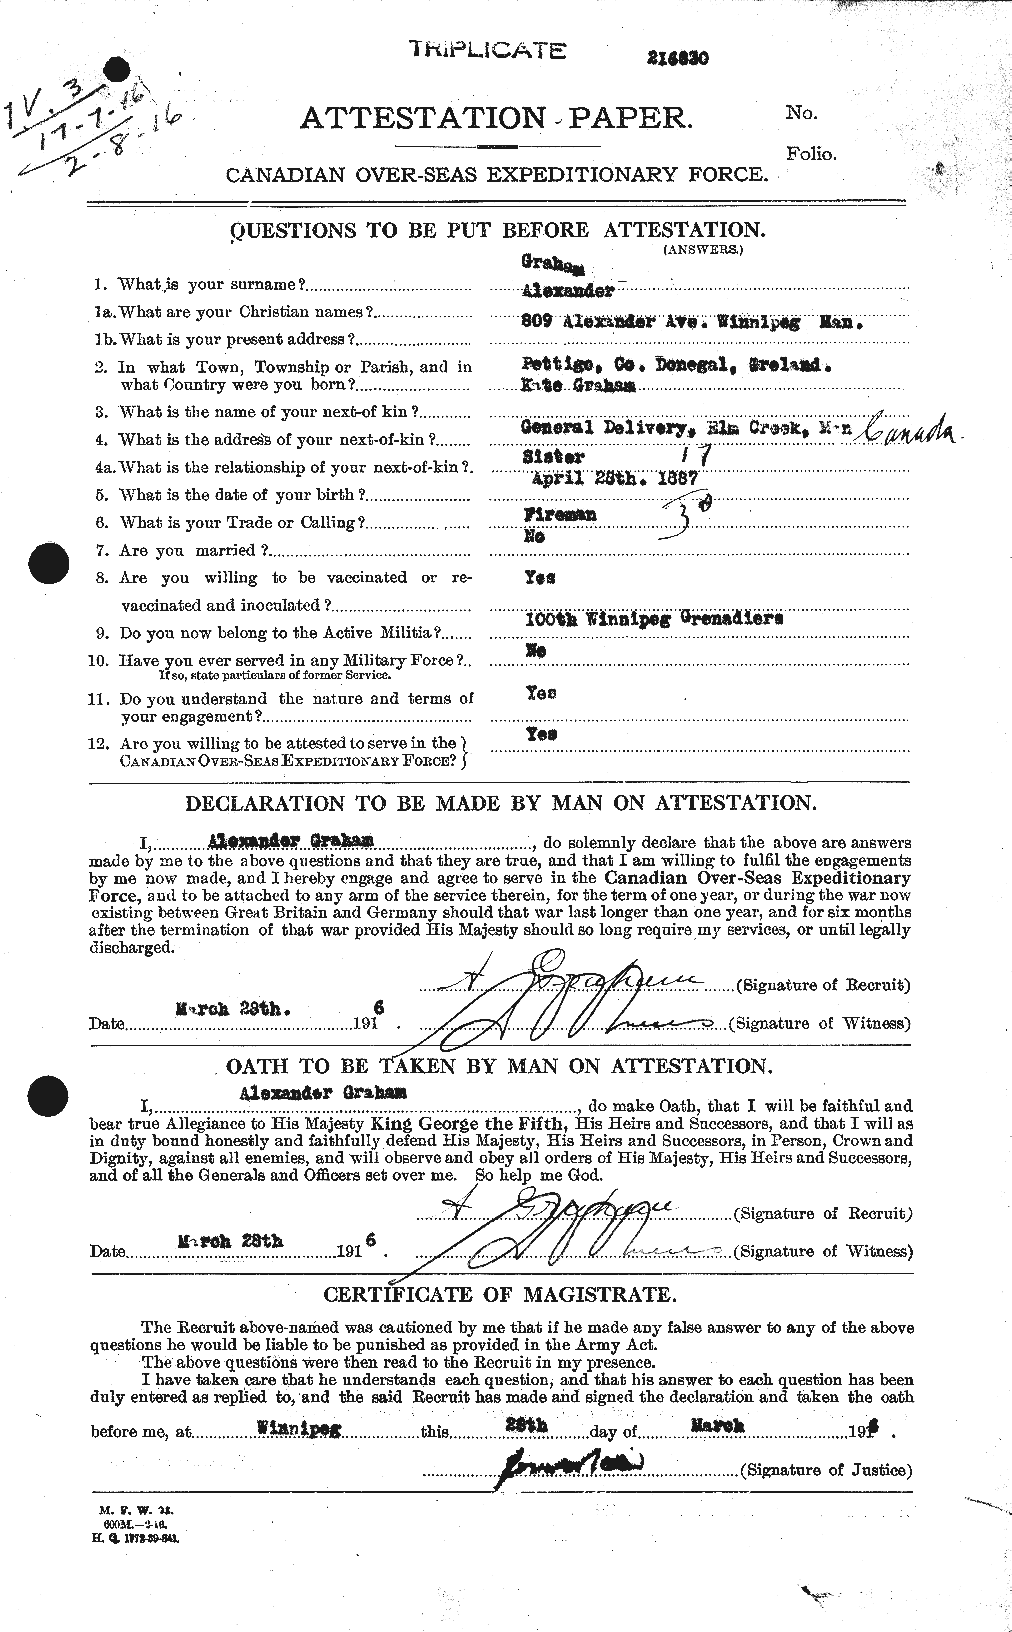 Personnel Records of the First World War - CEF 359579a